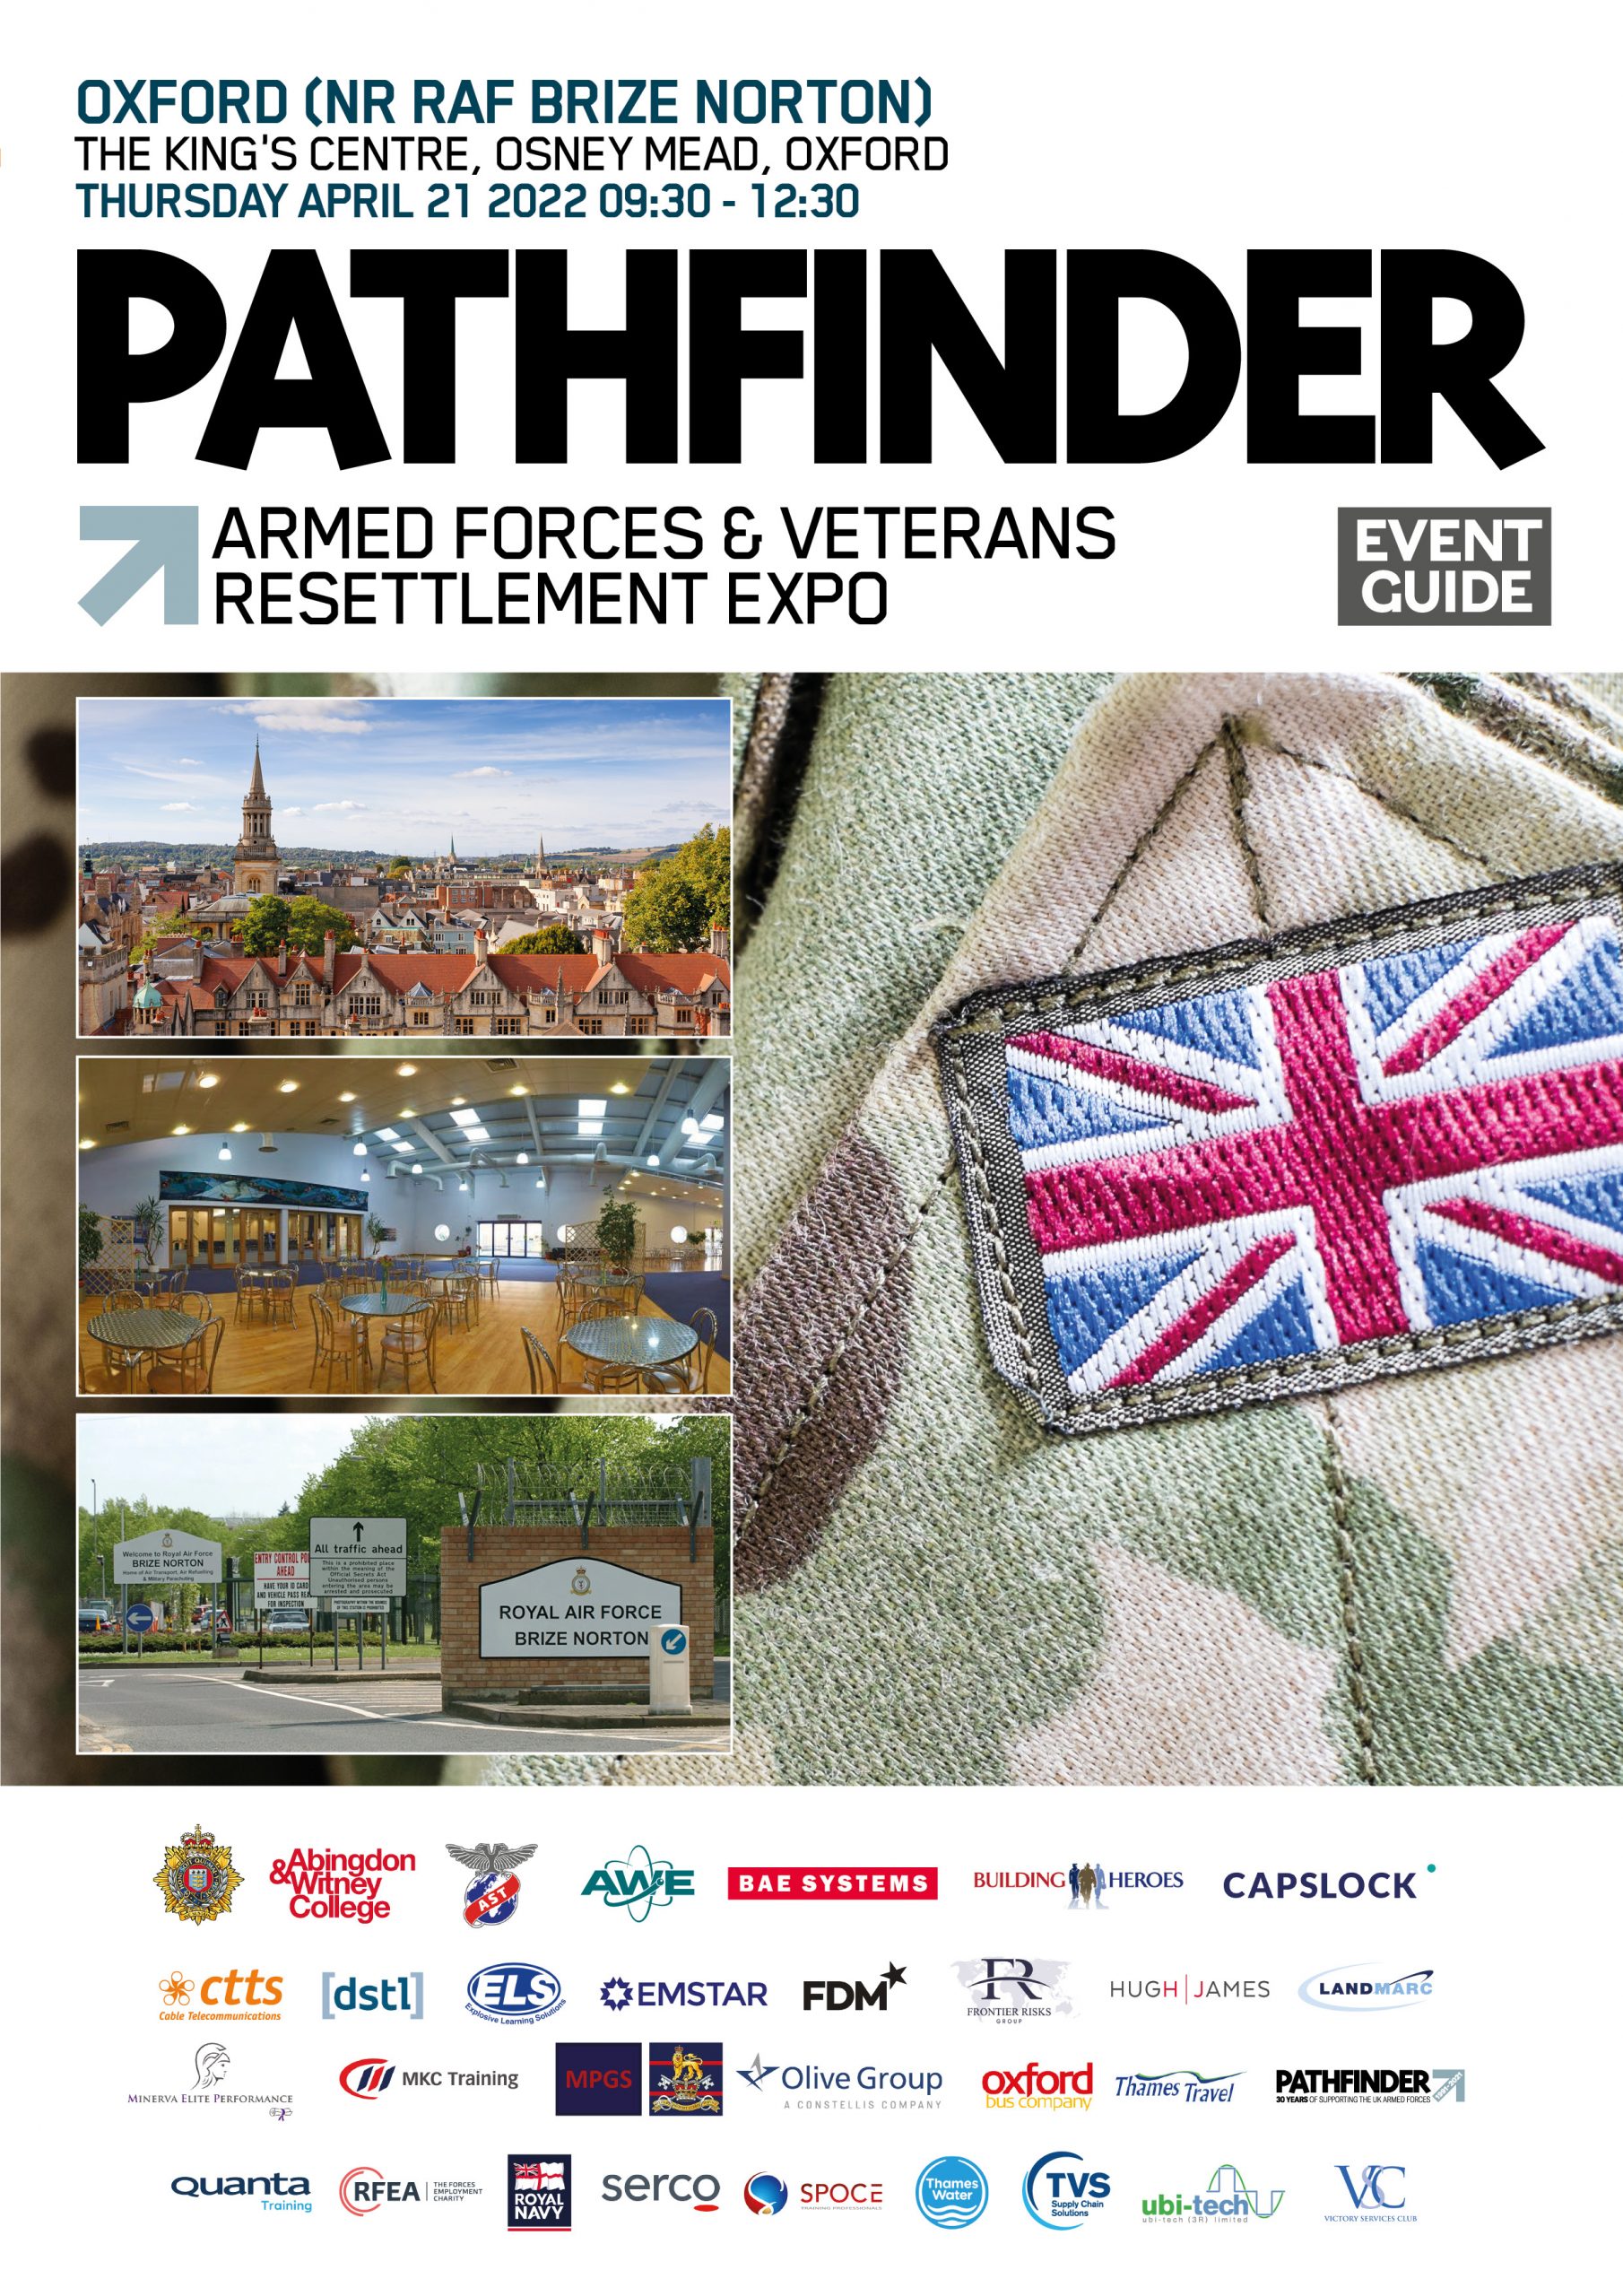 The Armed Forces & Veterans Resettlement Expo Oxford Is Now On!